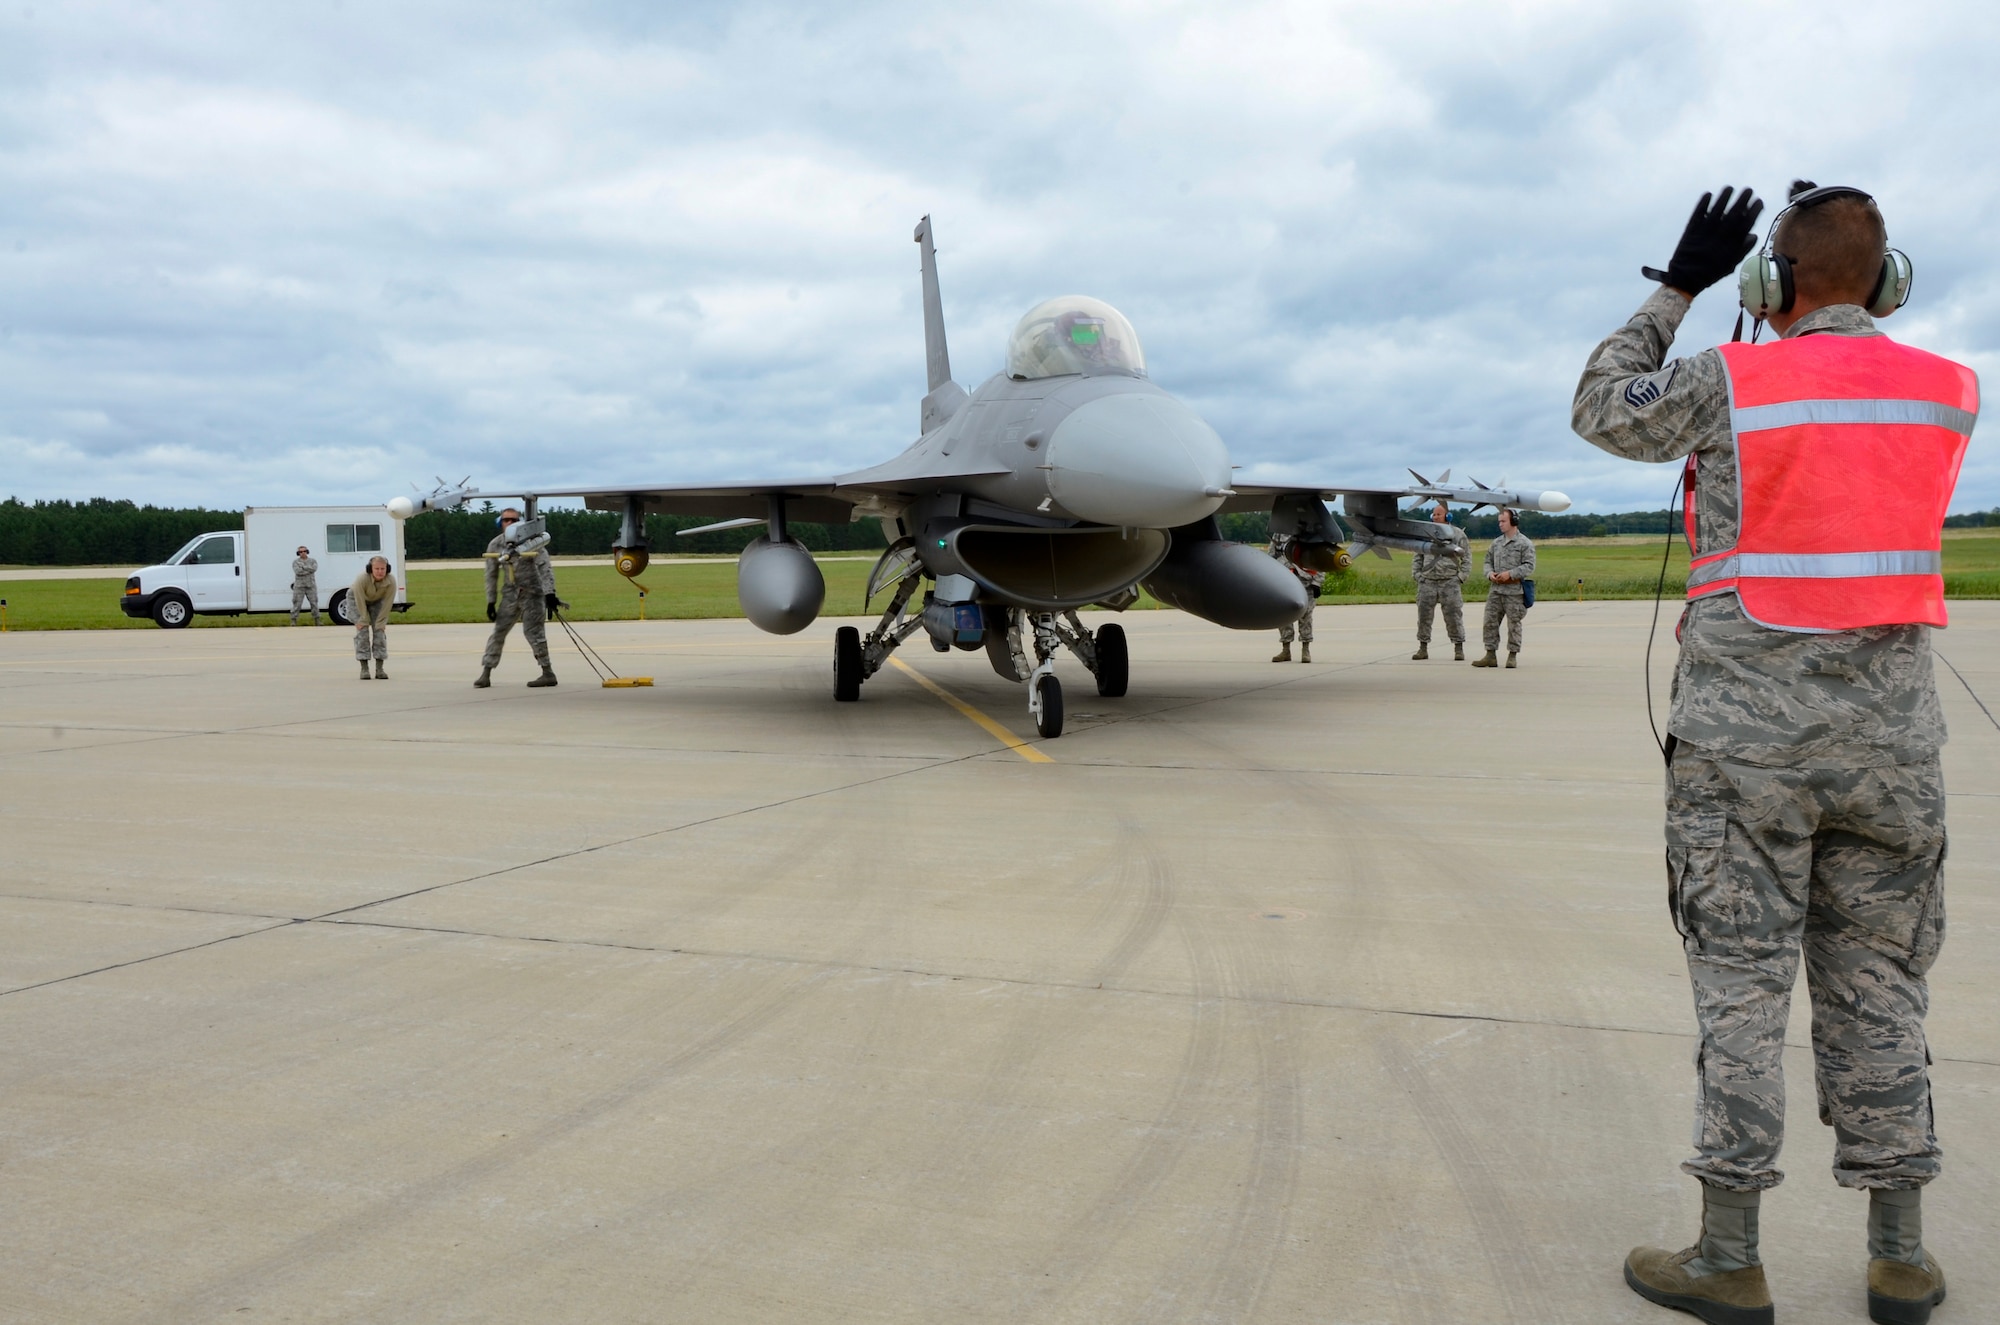 Master Sgt. Mike Rollag, 114th Fighter Wing crew chief, marshals a U.S. Air Force F-16 Fighting Falcon into last chance inspection at Volk Field, WI, Aug 11, 2017.